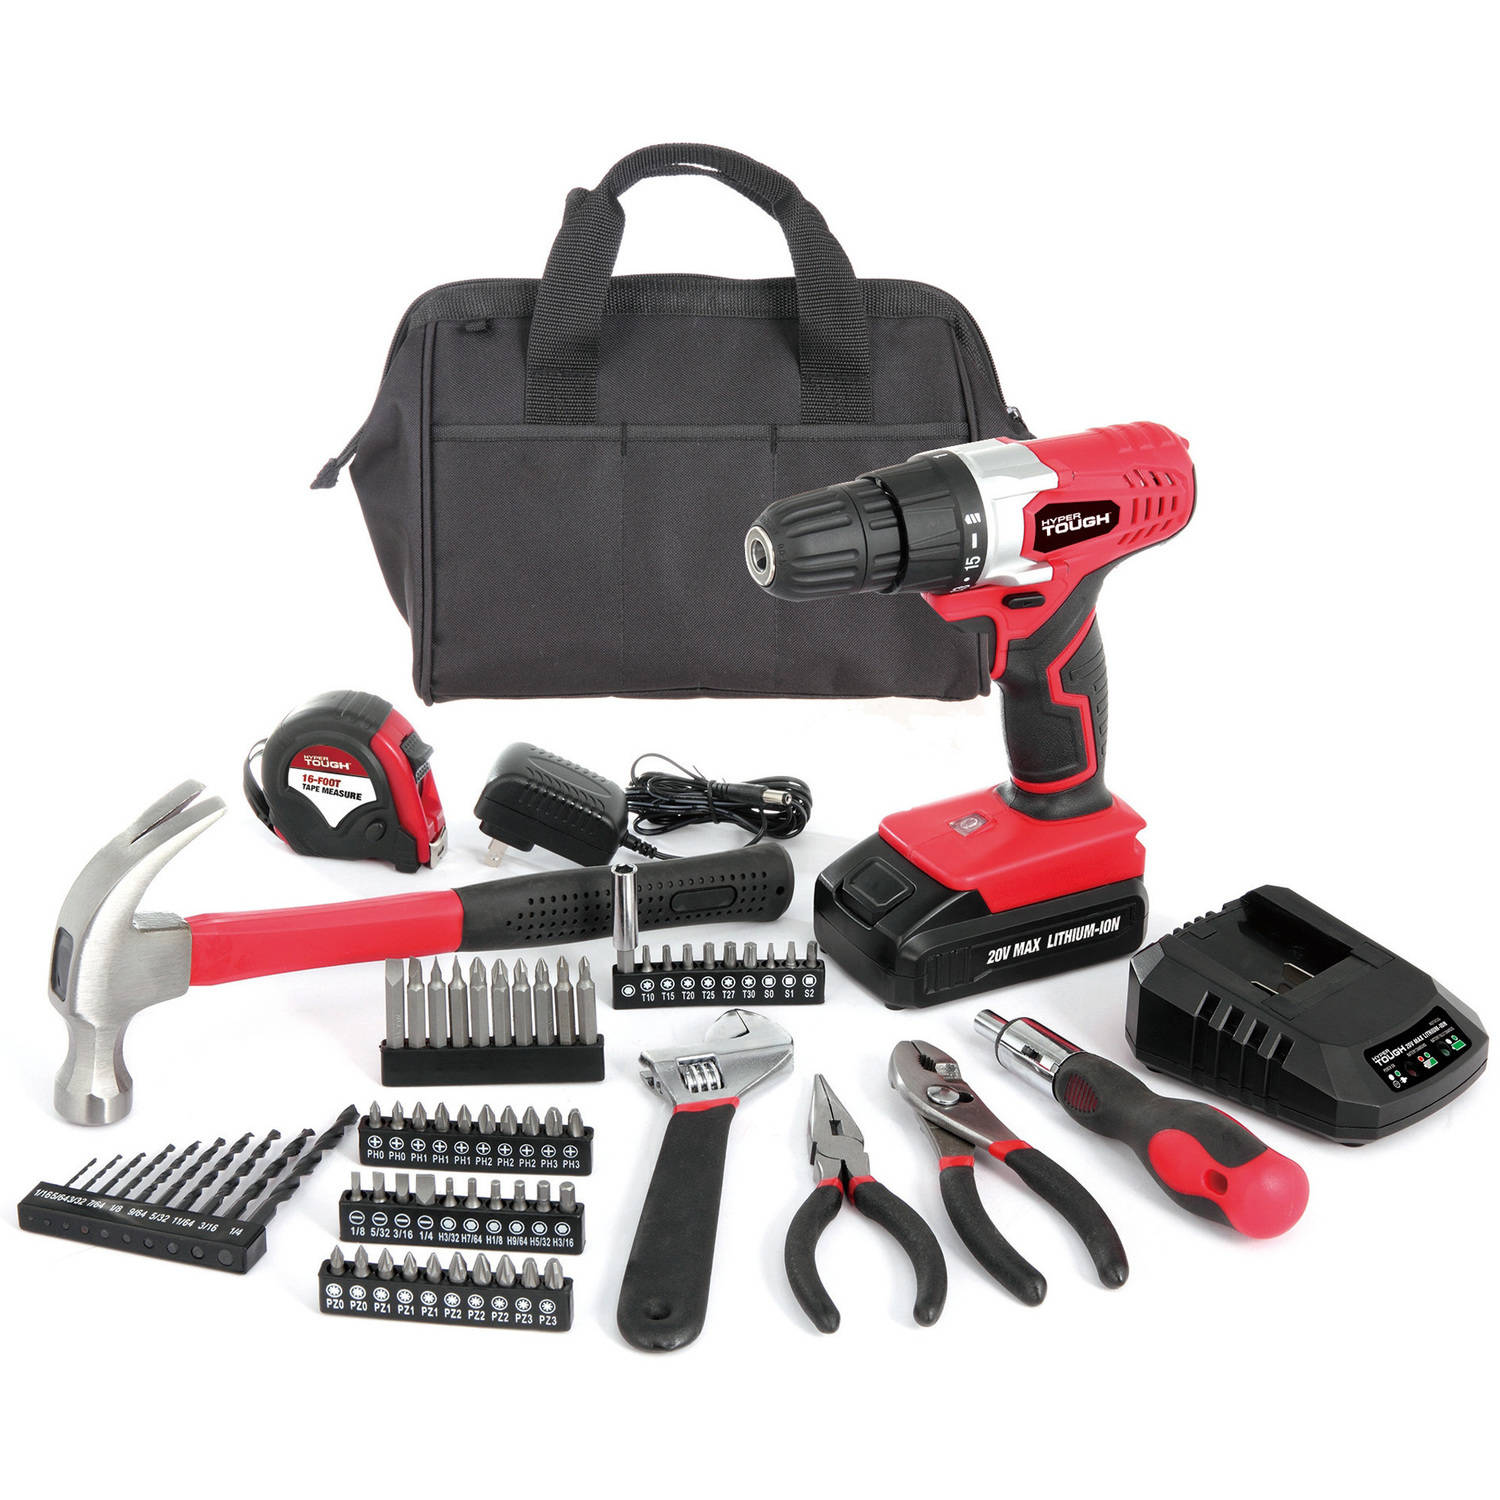 Hyper Tough 20V max lithium ion drill with 70-piece project kit for $40, free shipping